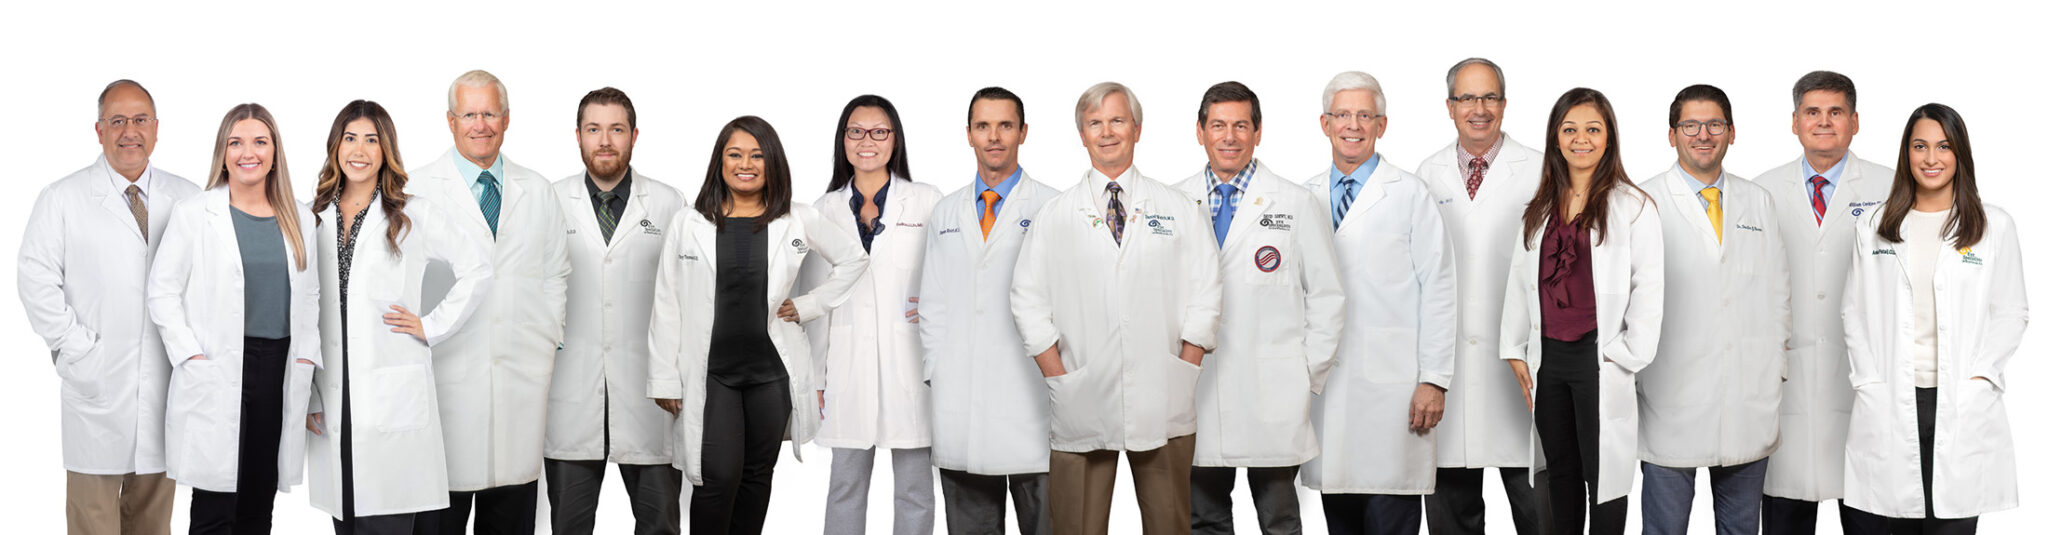 Eye Specialists of Mid Florida doctors group photo